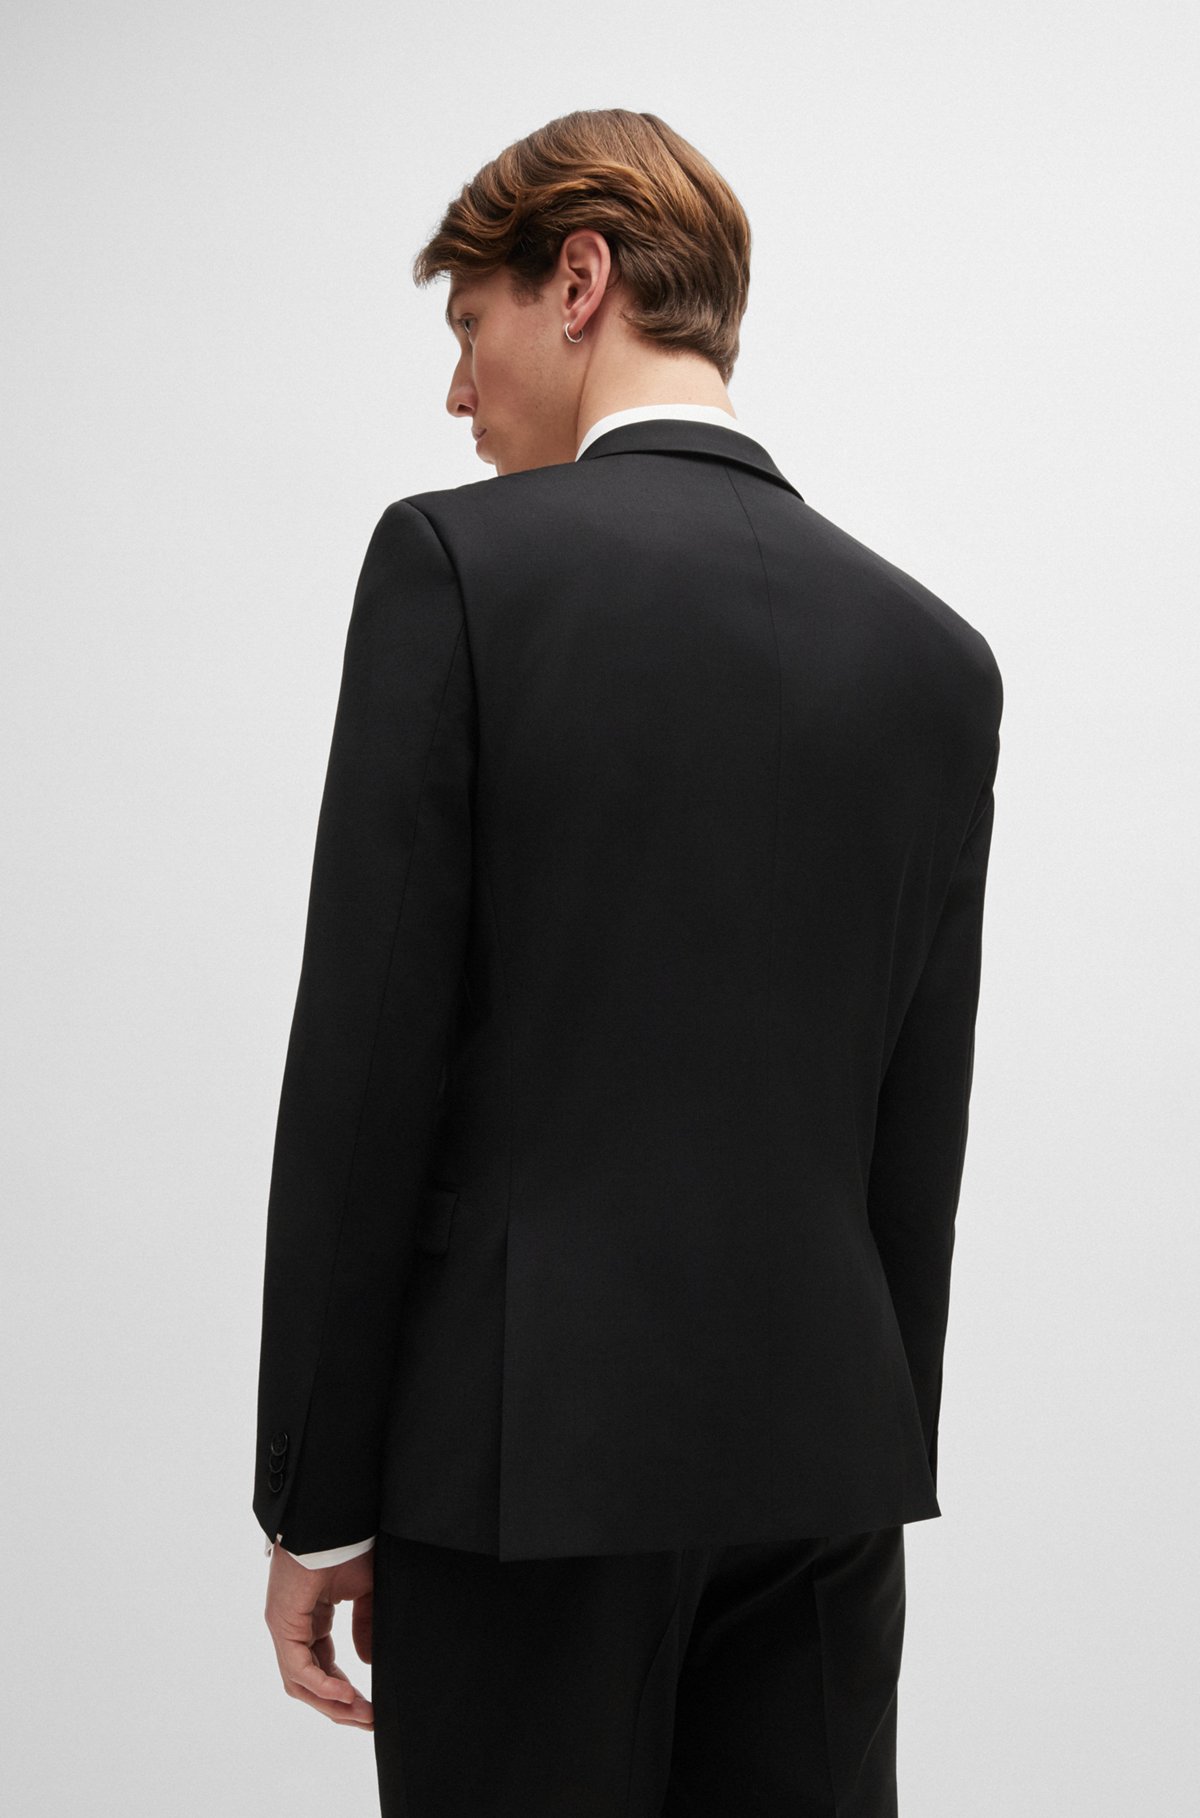 Extra-slim-fit jacket in a stretch-wool blend, Black